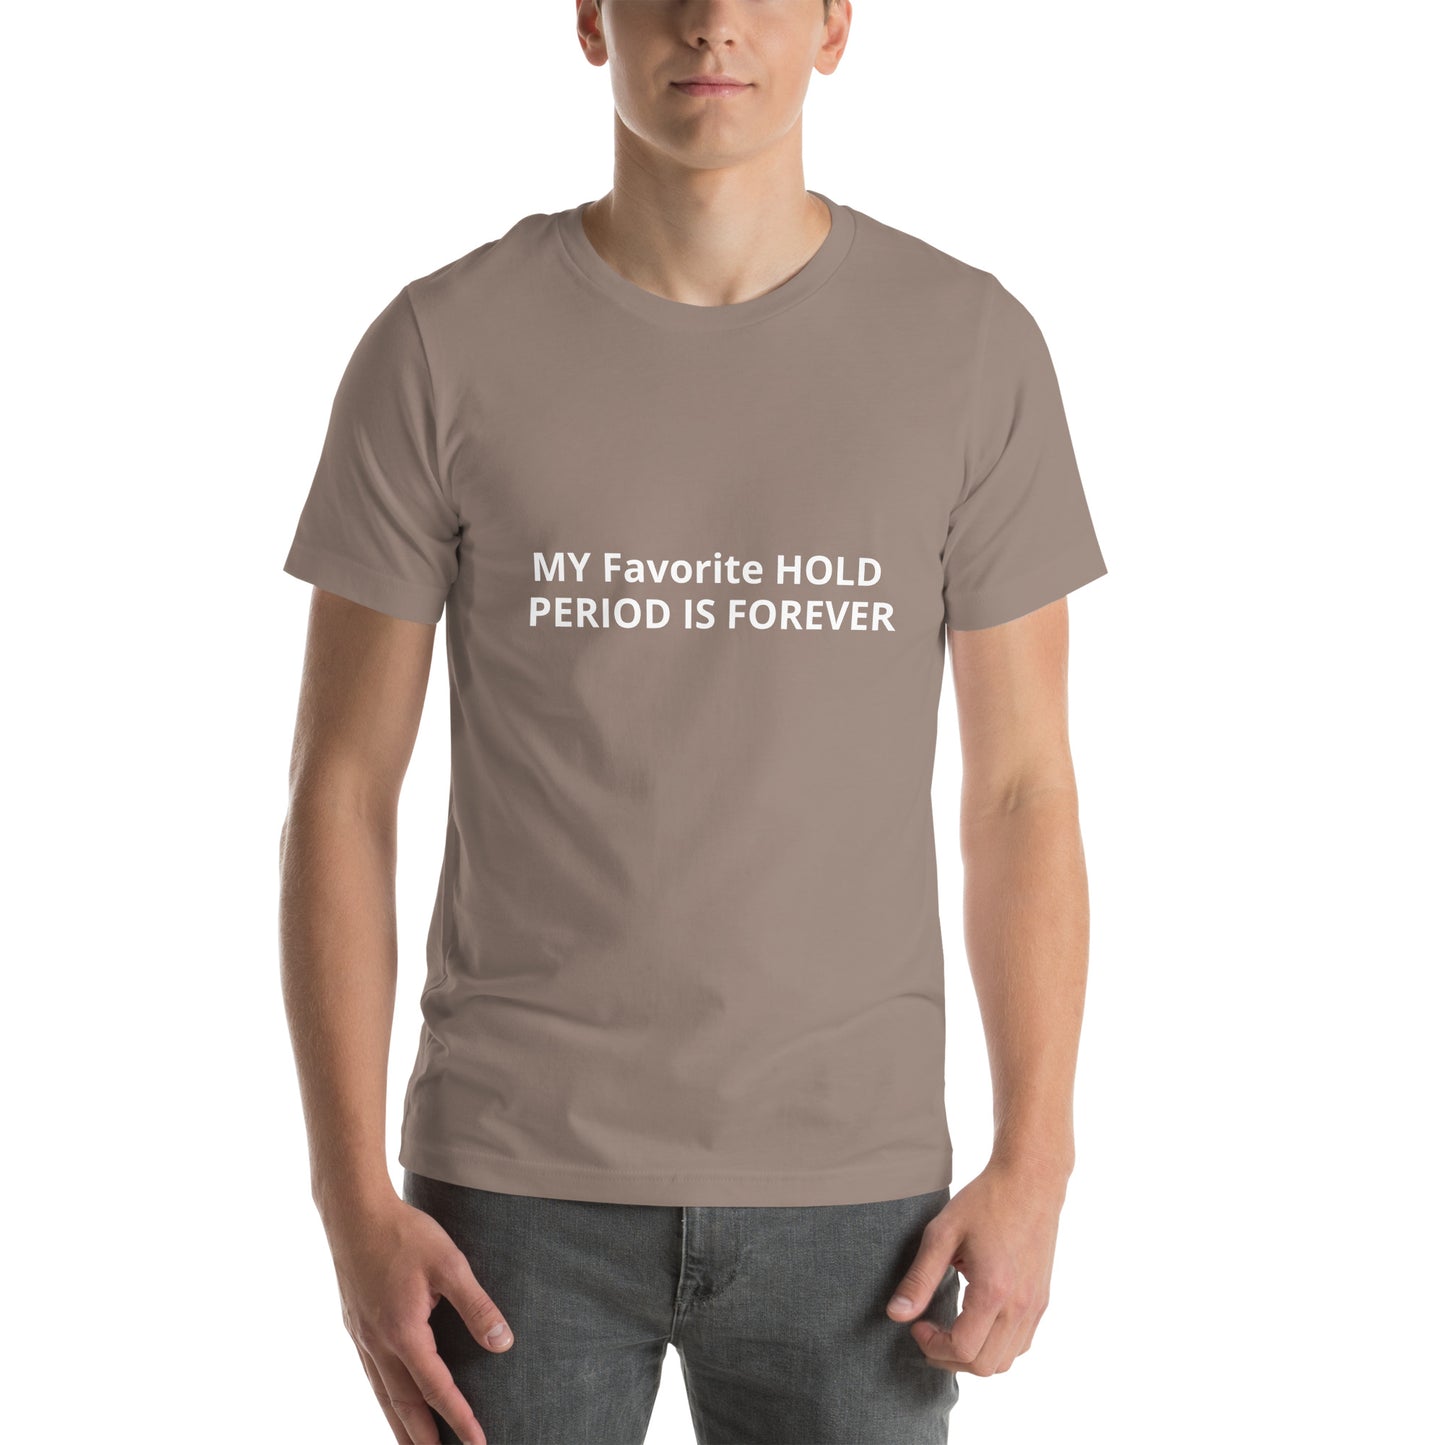 MY Favorite HOLD PERIOD IS FOREVER  Unisex t-shirt